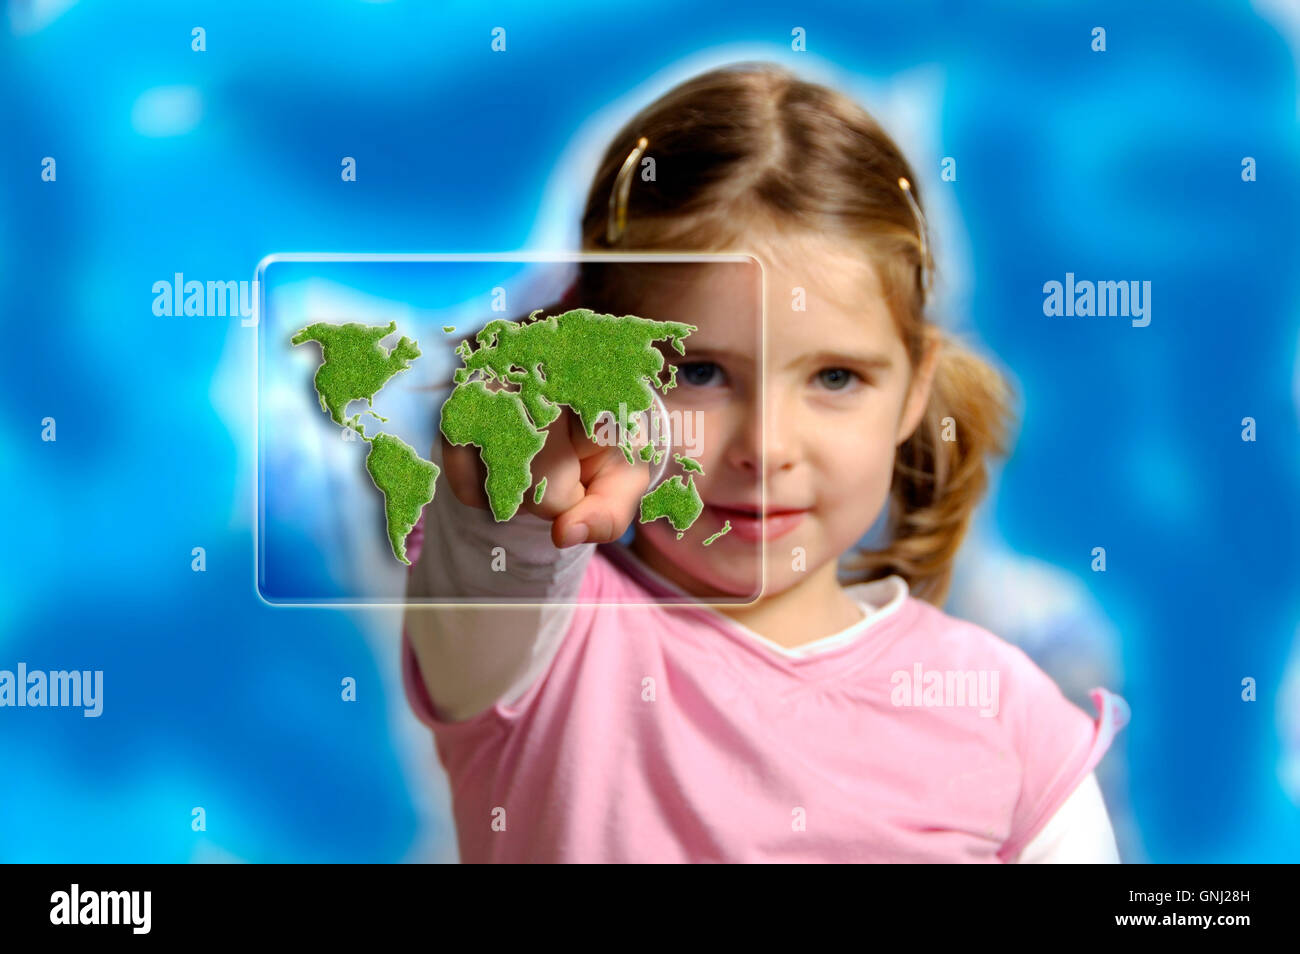 girl pointing a finger to a screen with green earth map - concept for protect earth for future generations Stock Photo